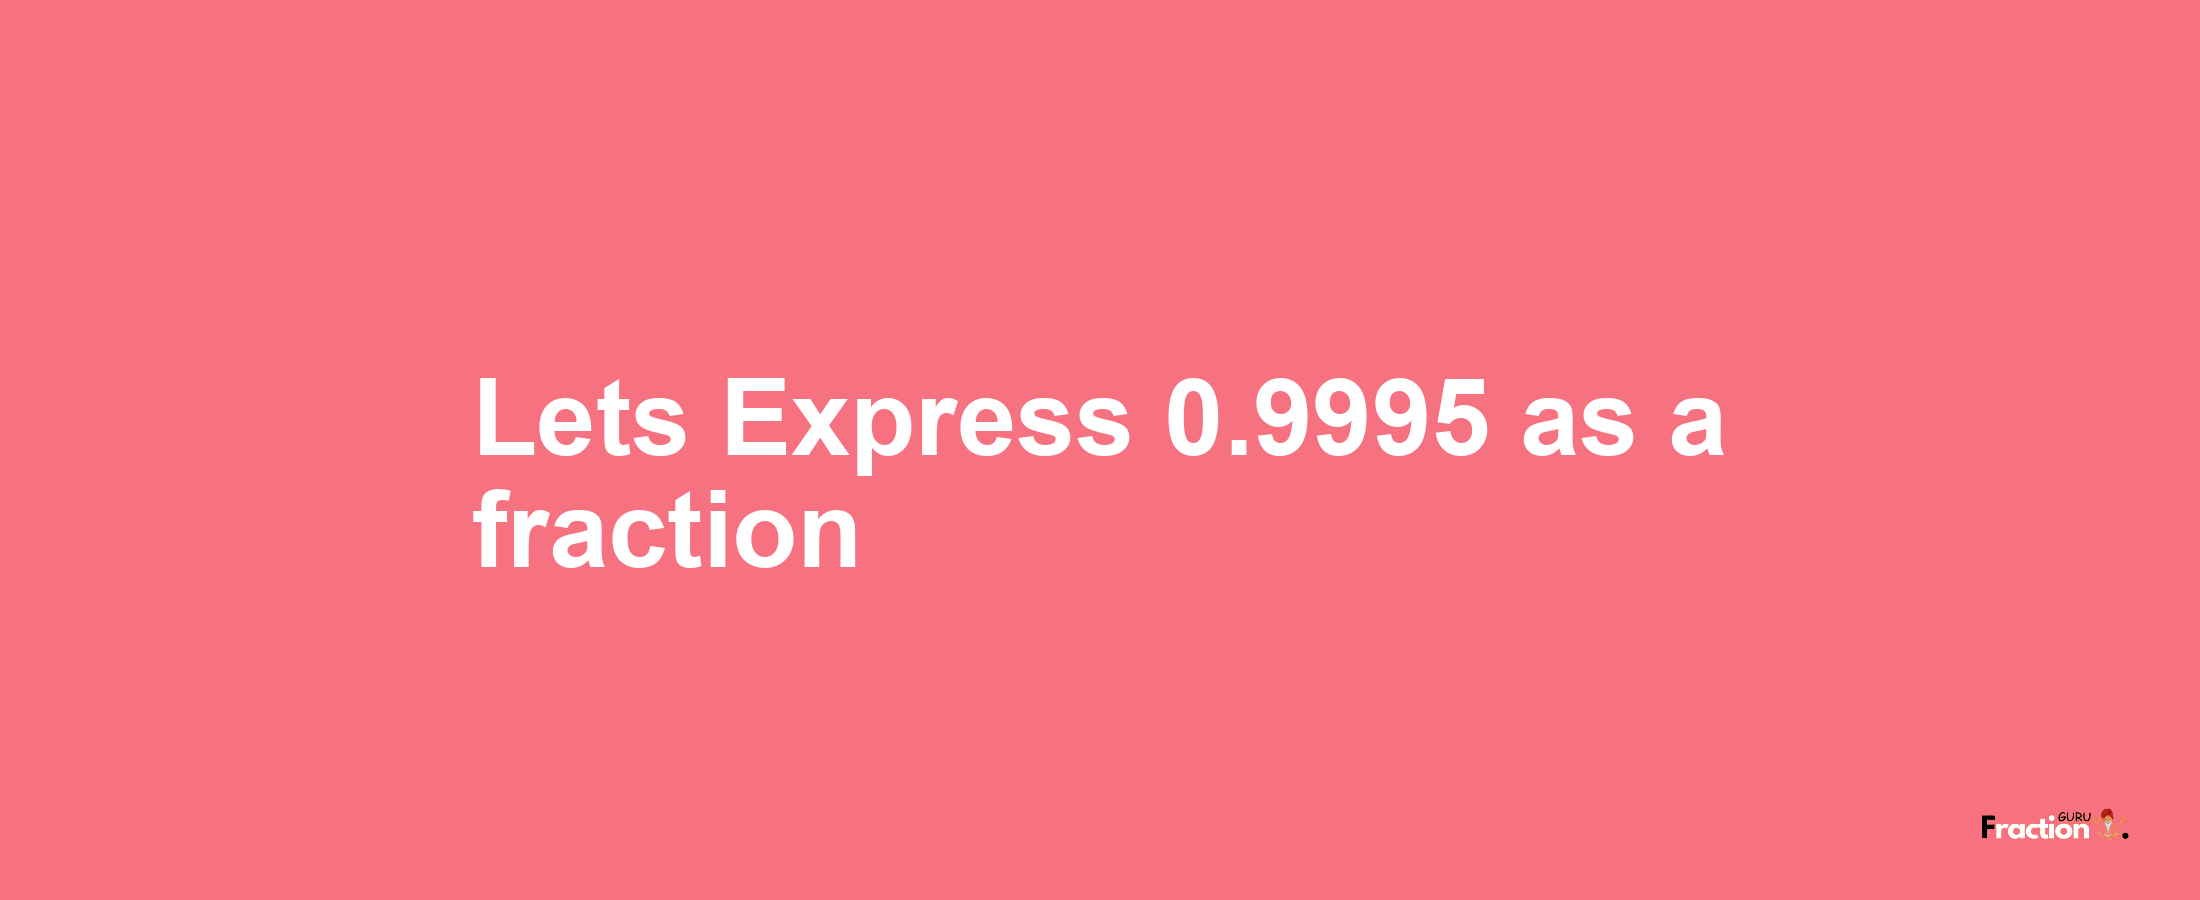 Lets Express 0.9995 as afraction